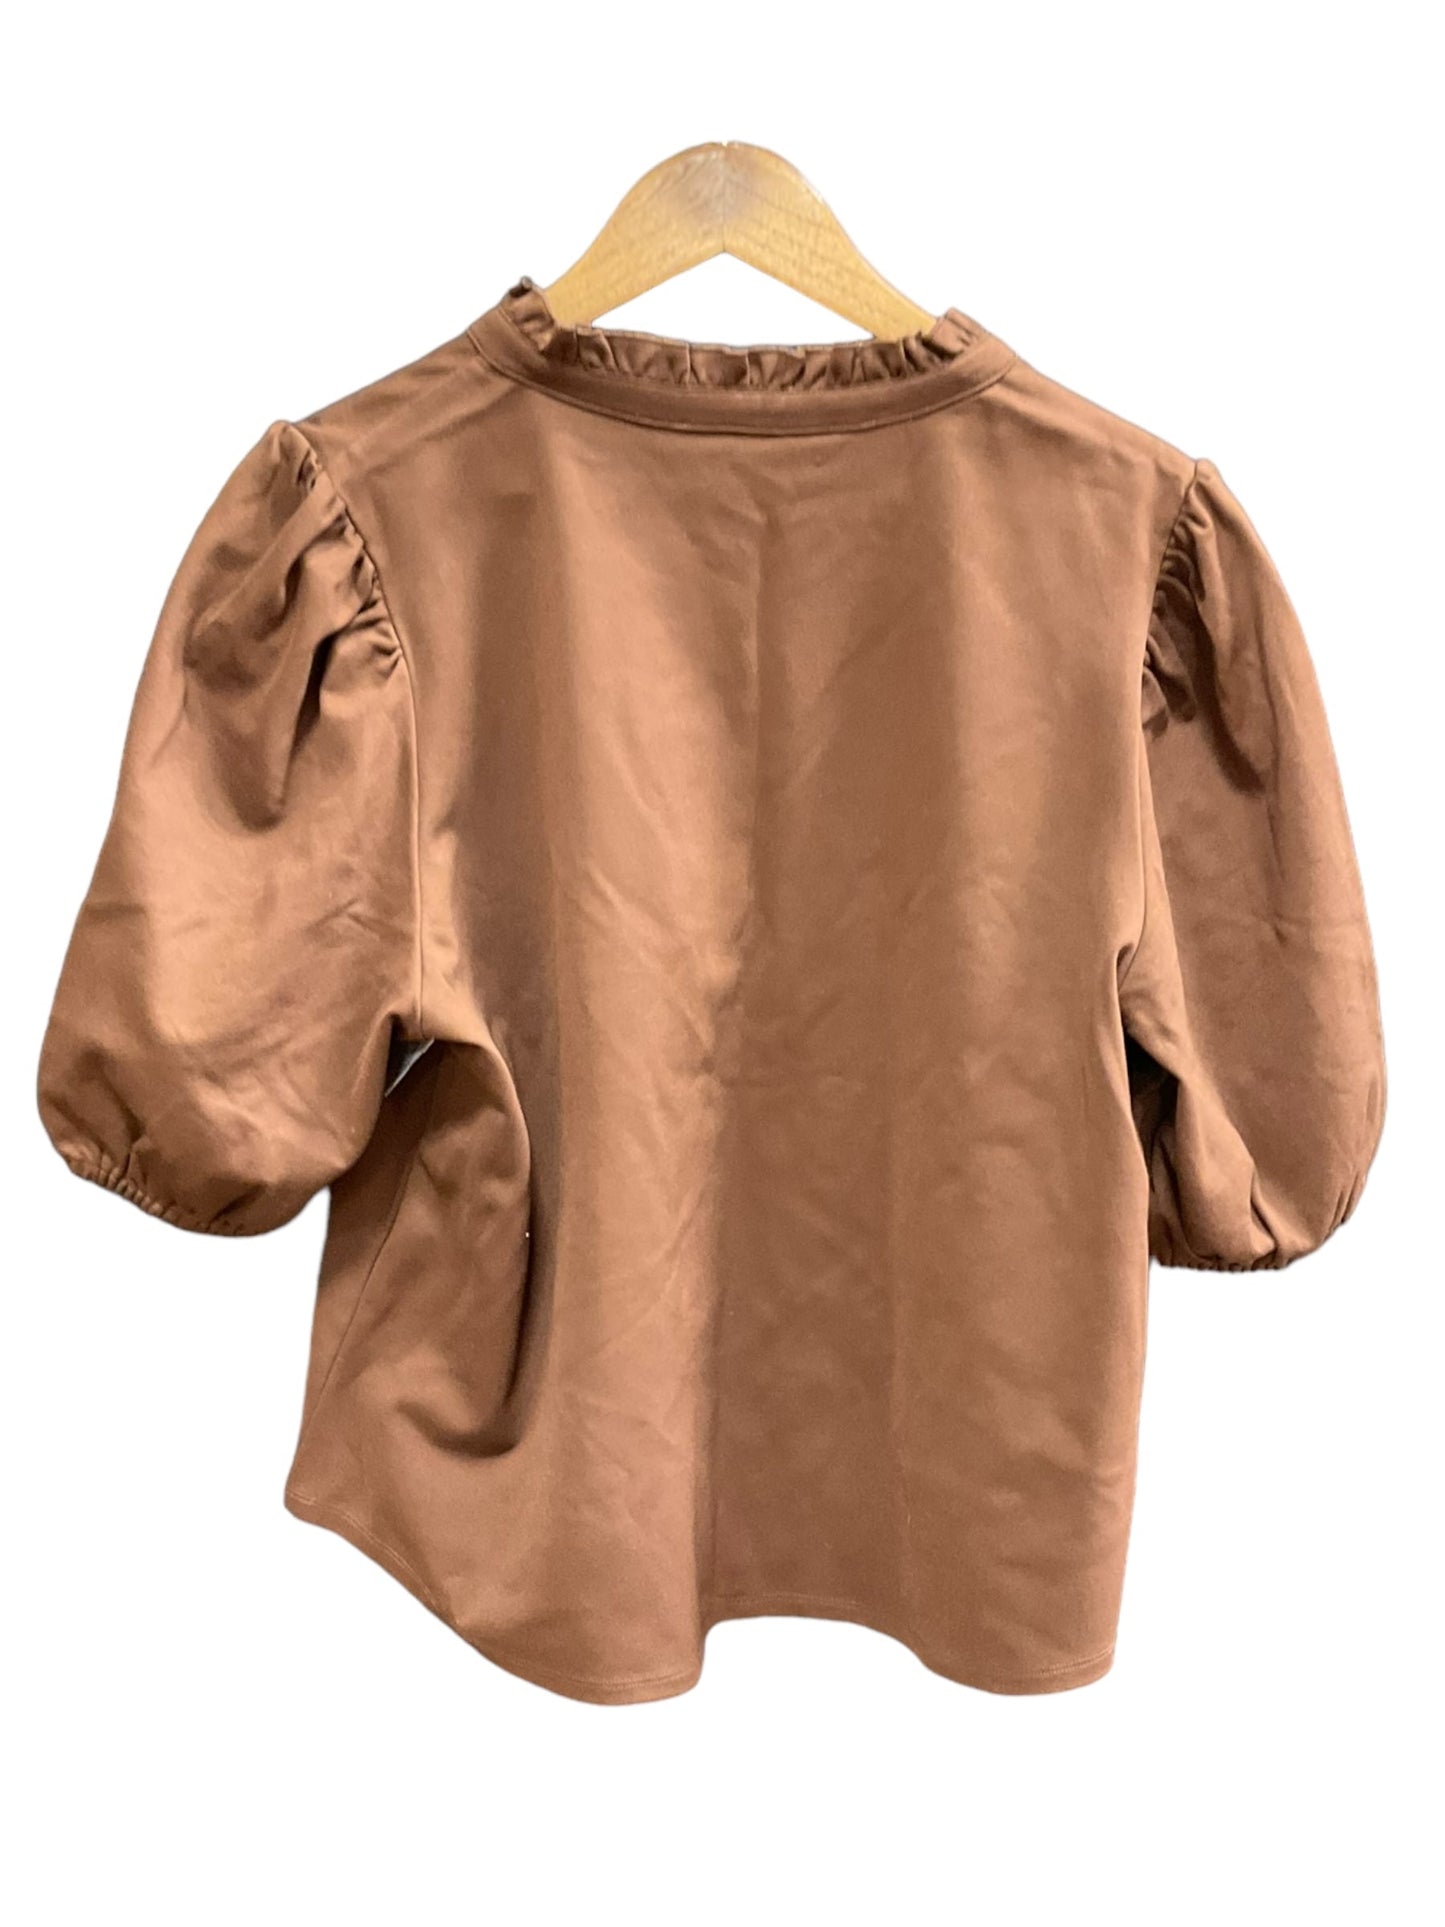 Brown Top 3/4 Sleeve Marc New York, Size Xl